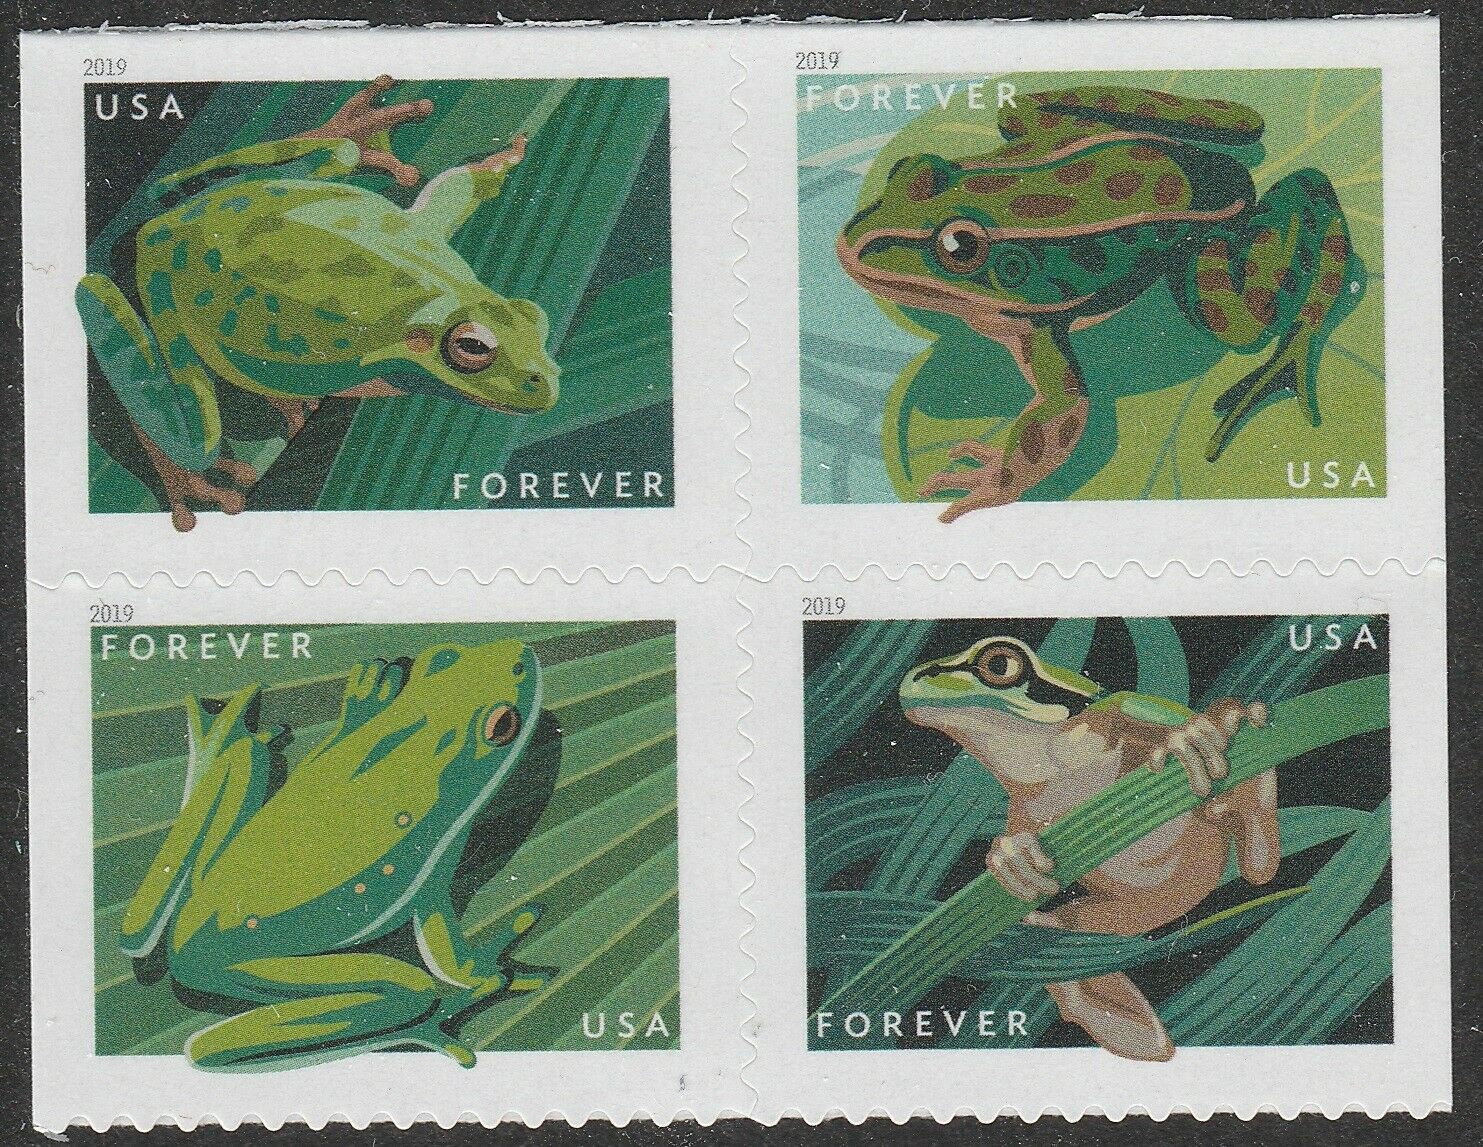 5395-98 Forever Frogs Mint Block of 4  #5395-98blk